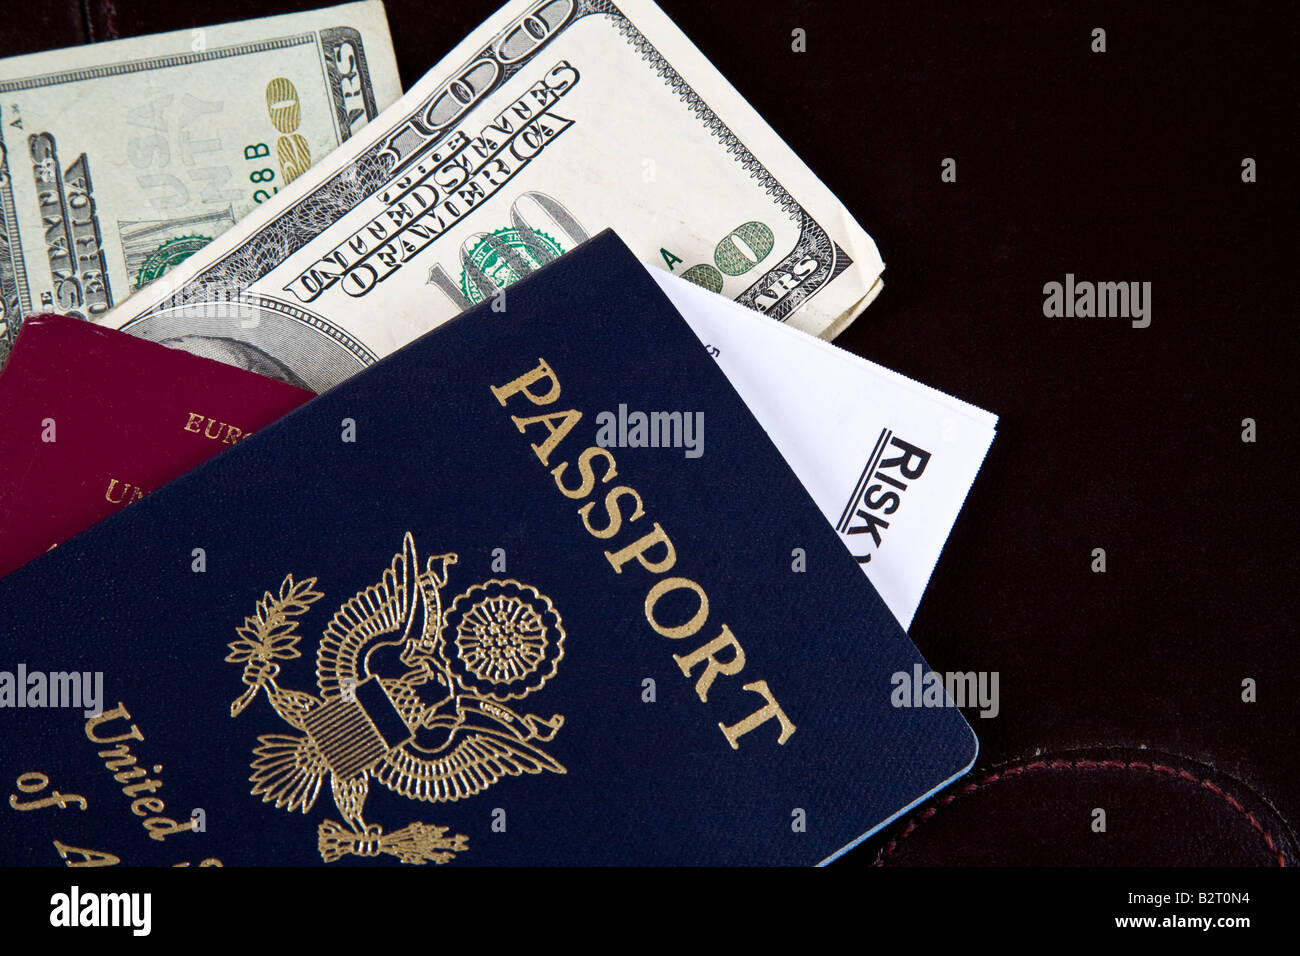 USA and British passports with US dollars protruding and card with risk Stock Photo